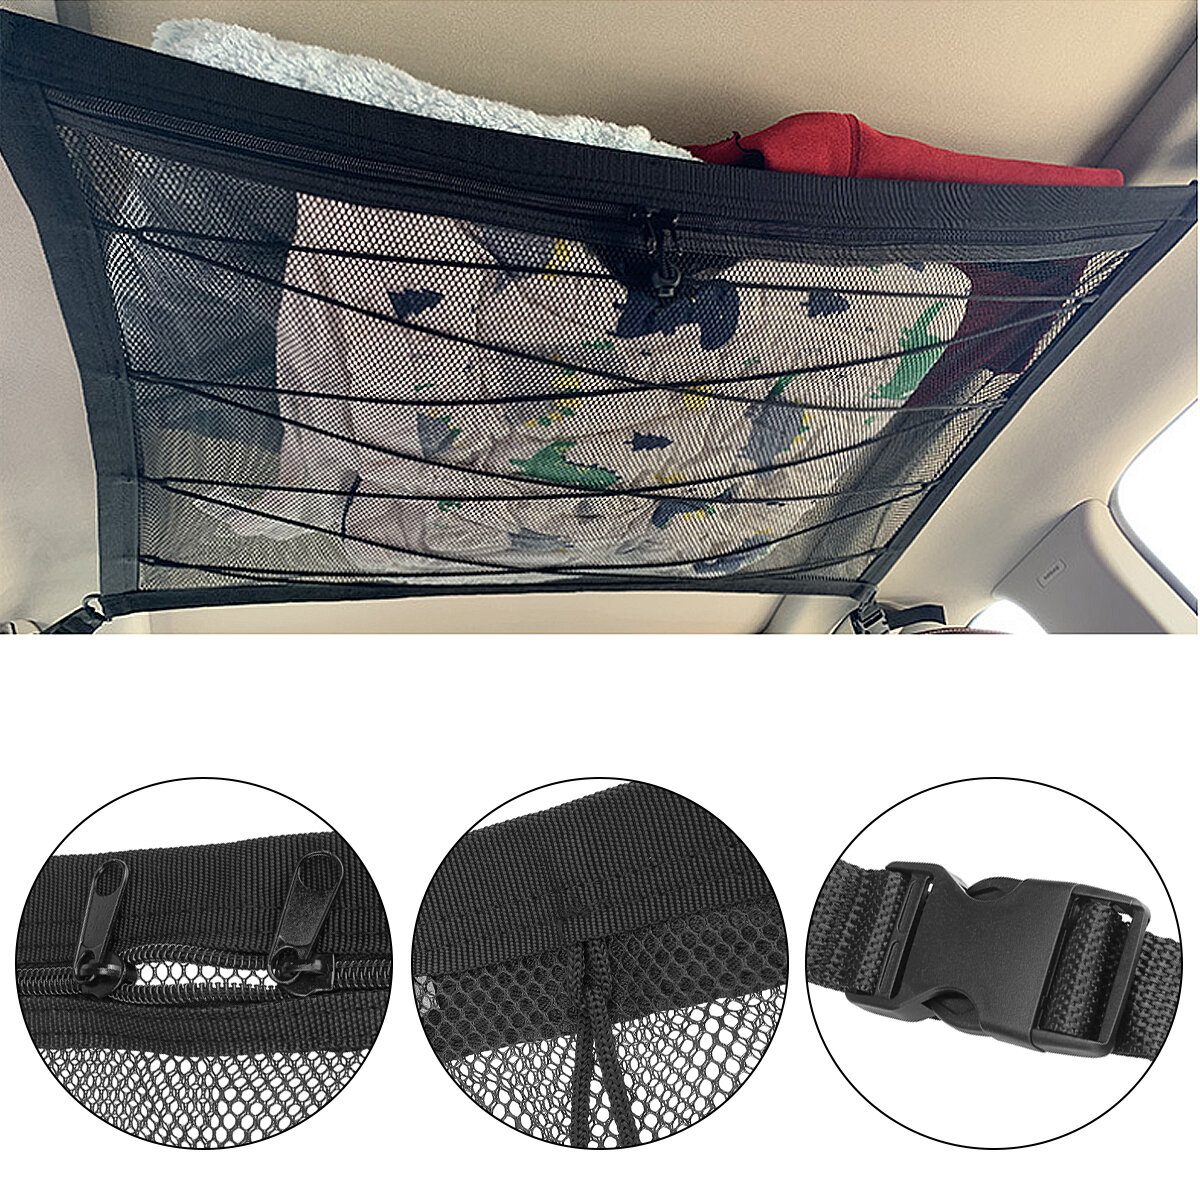 

90x65cm Double-Deck Foldable Car Roof Ceiling Cargo Net Mesh Storage Bag Pockets Pouch Universal For SUV Van